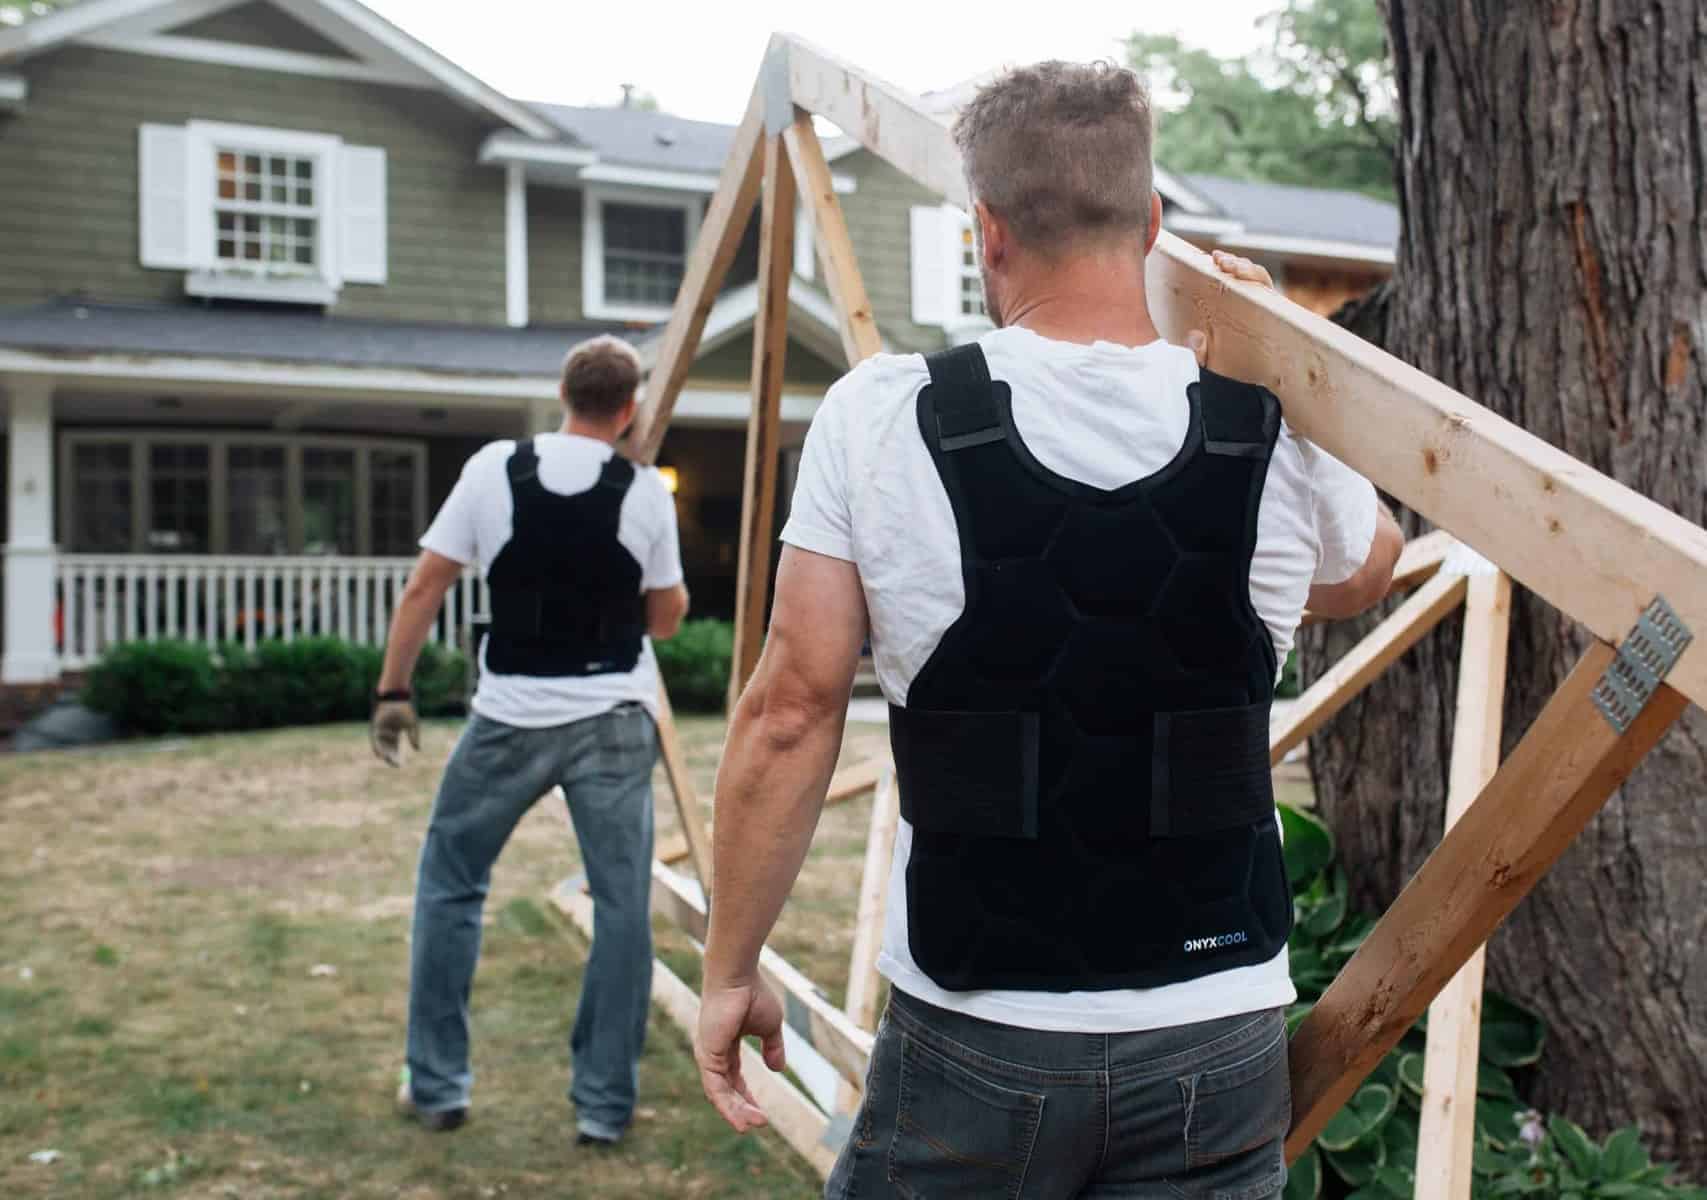 Featured image for “Safety Pro Vest”